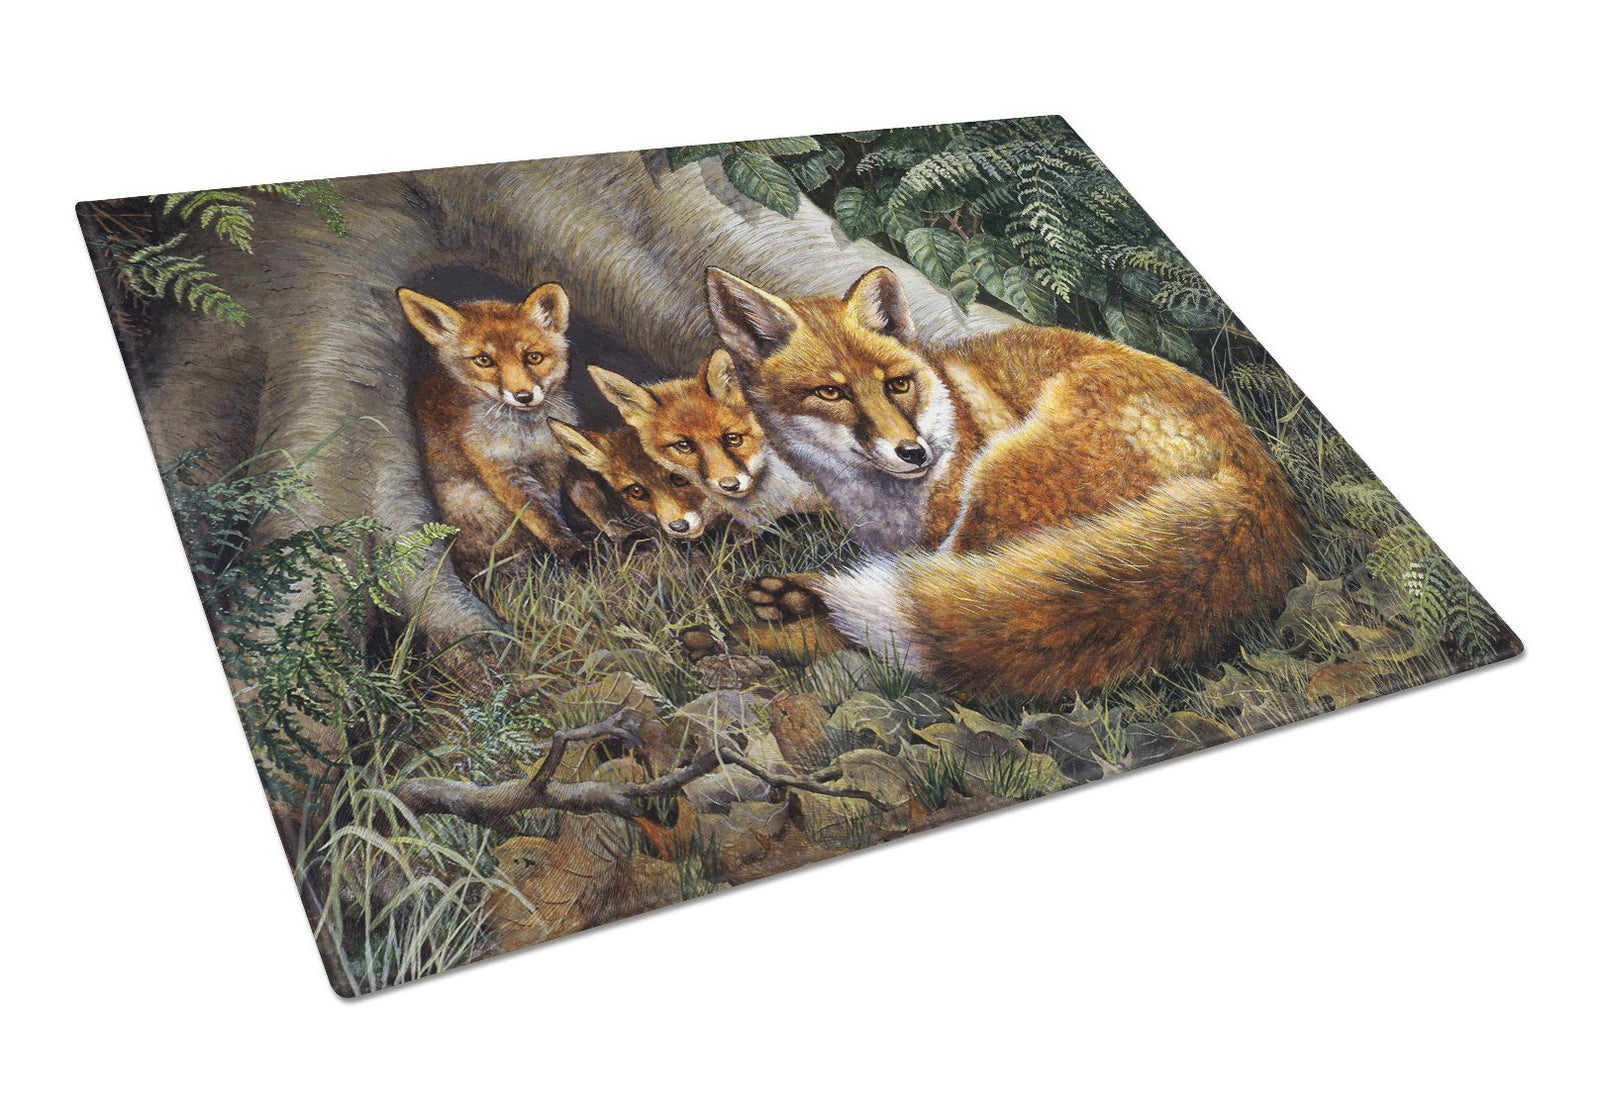 A Family of Foxes at Home Glass Cutting Board Large BDBA0283LCB by Caroline's Treasures